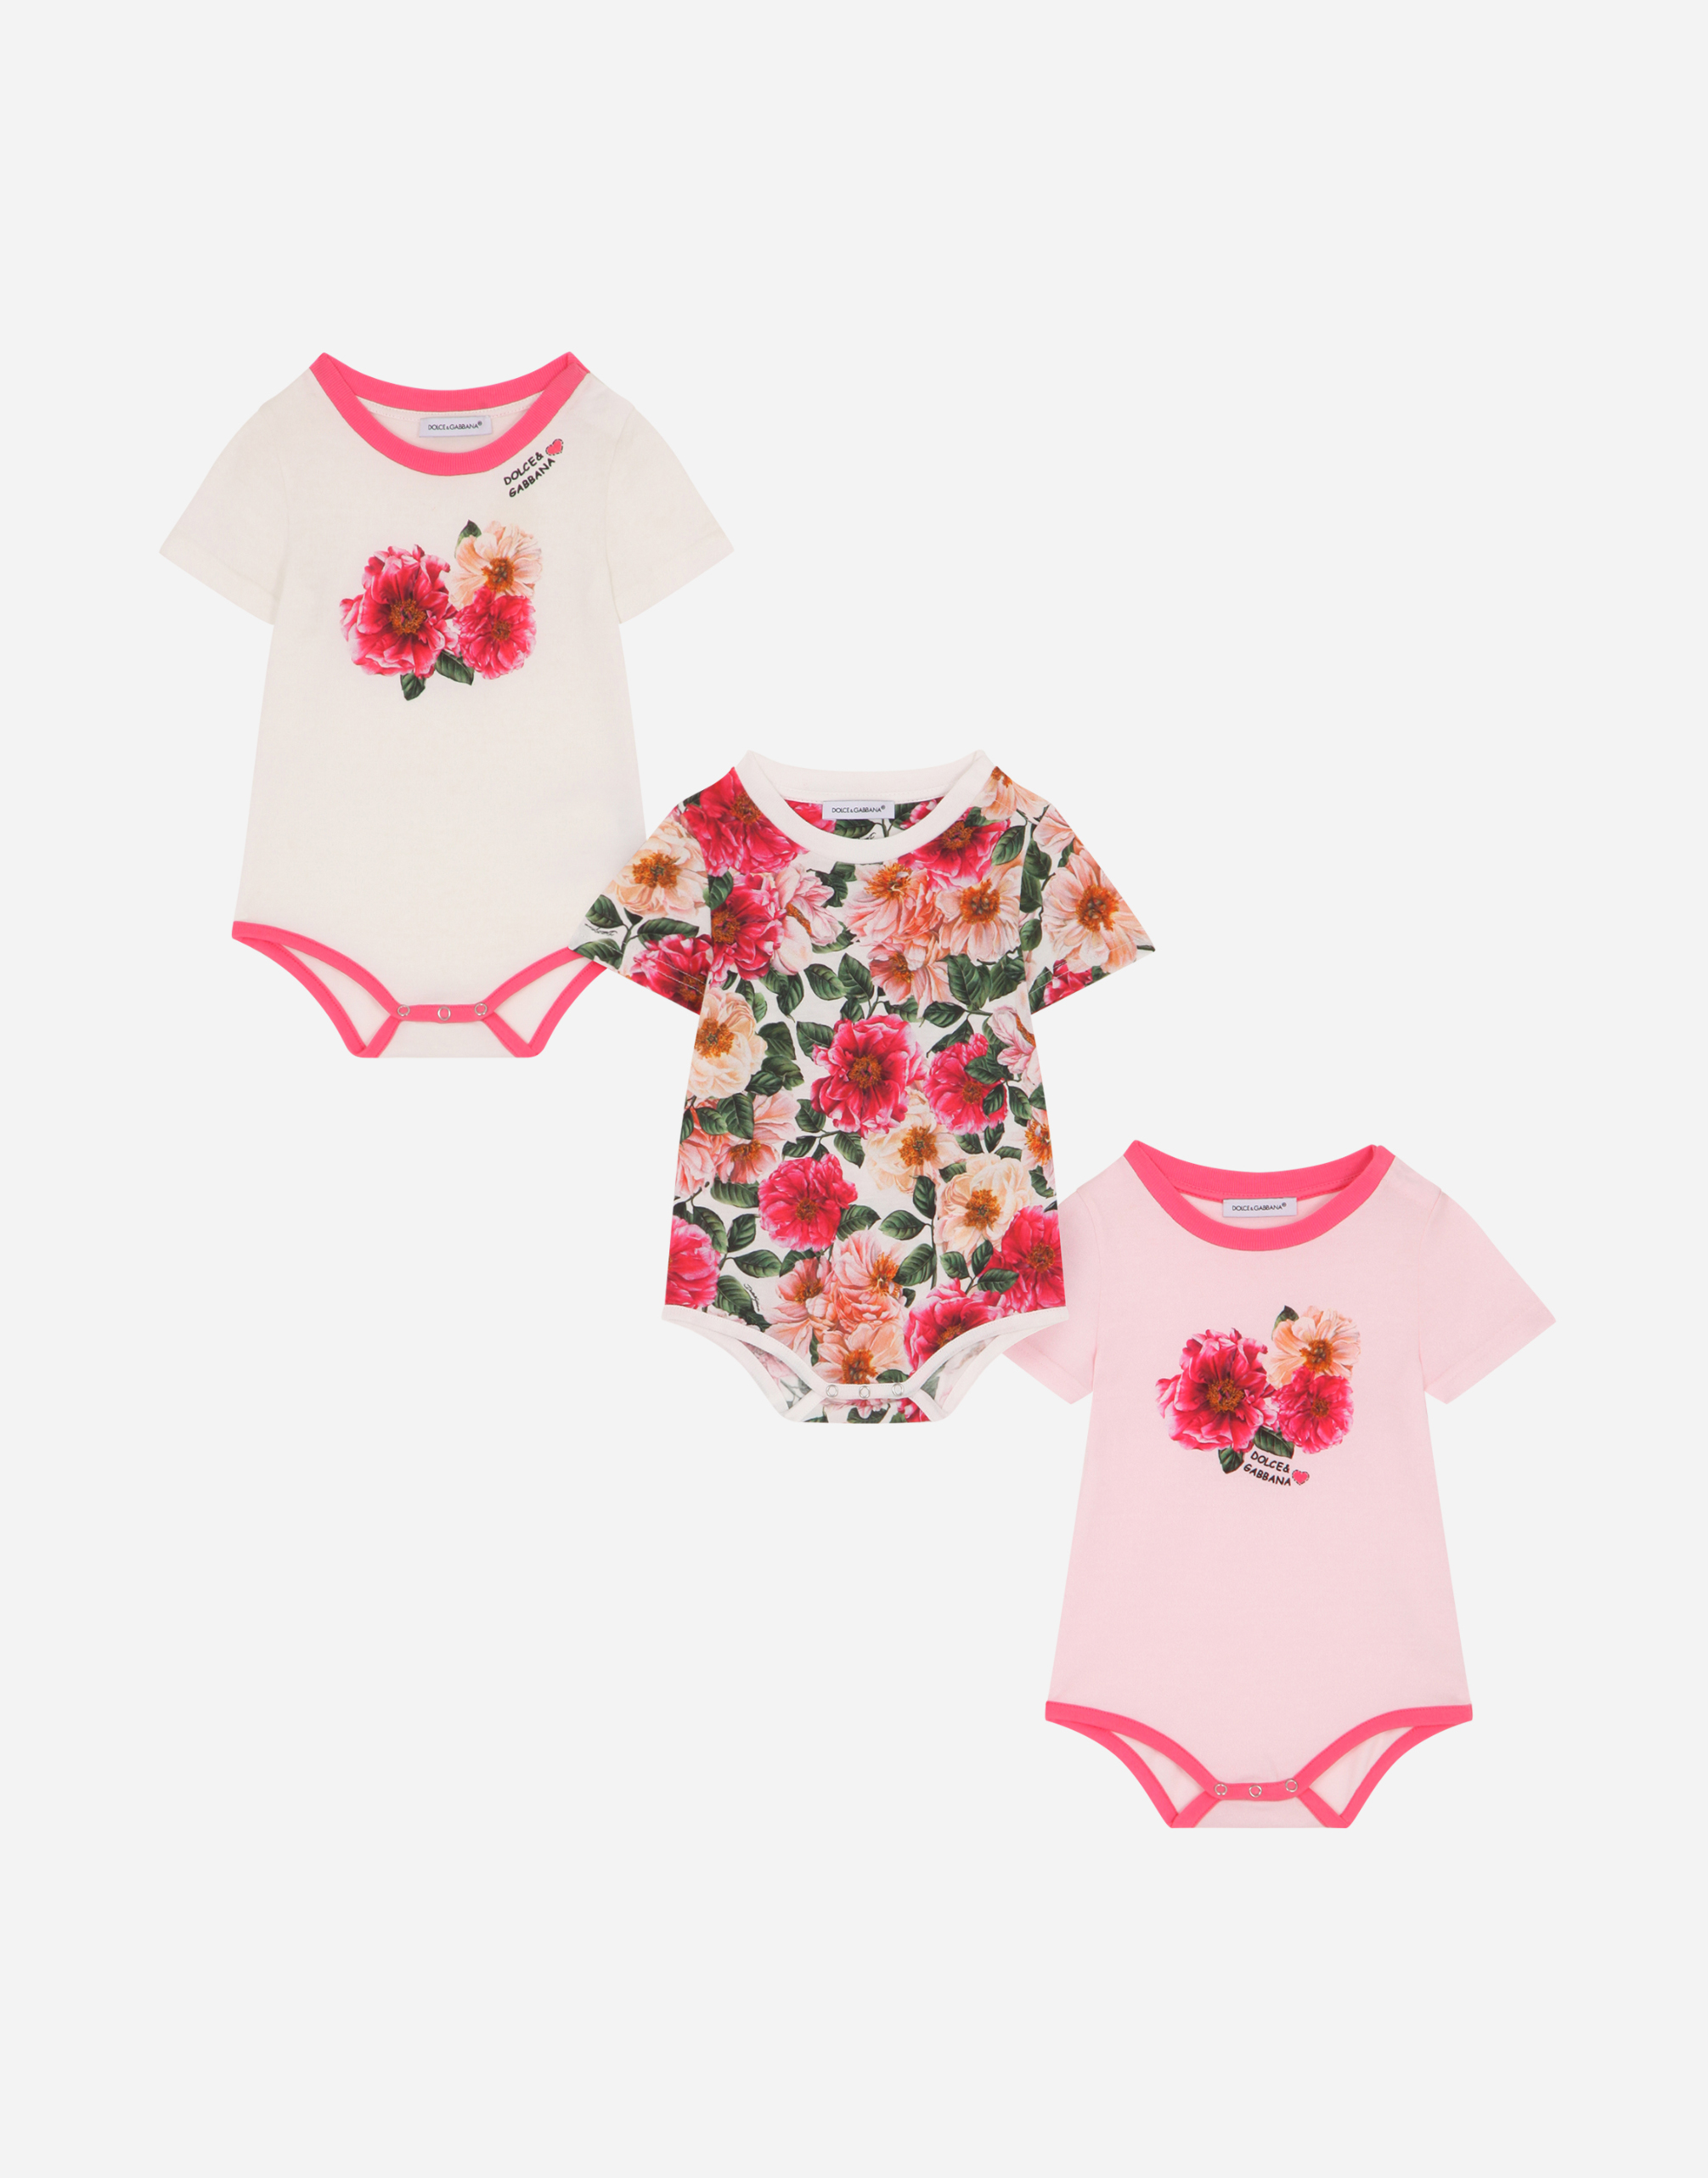 DOLCE & GABBANA Gift set with 3 camellia-print jersey babygrows